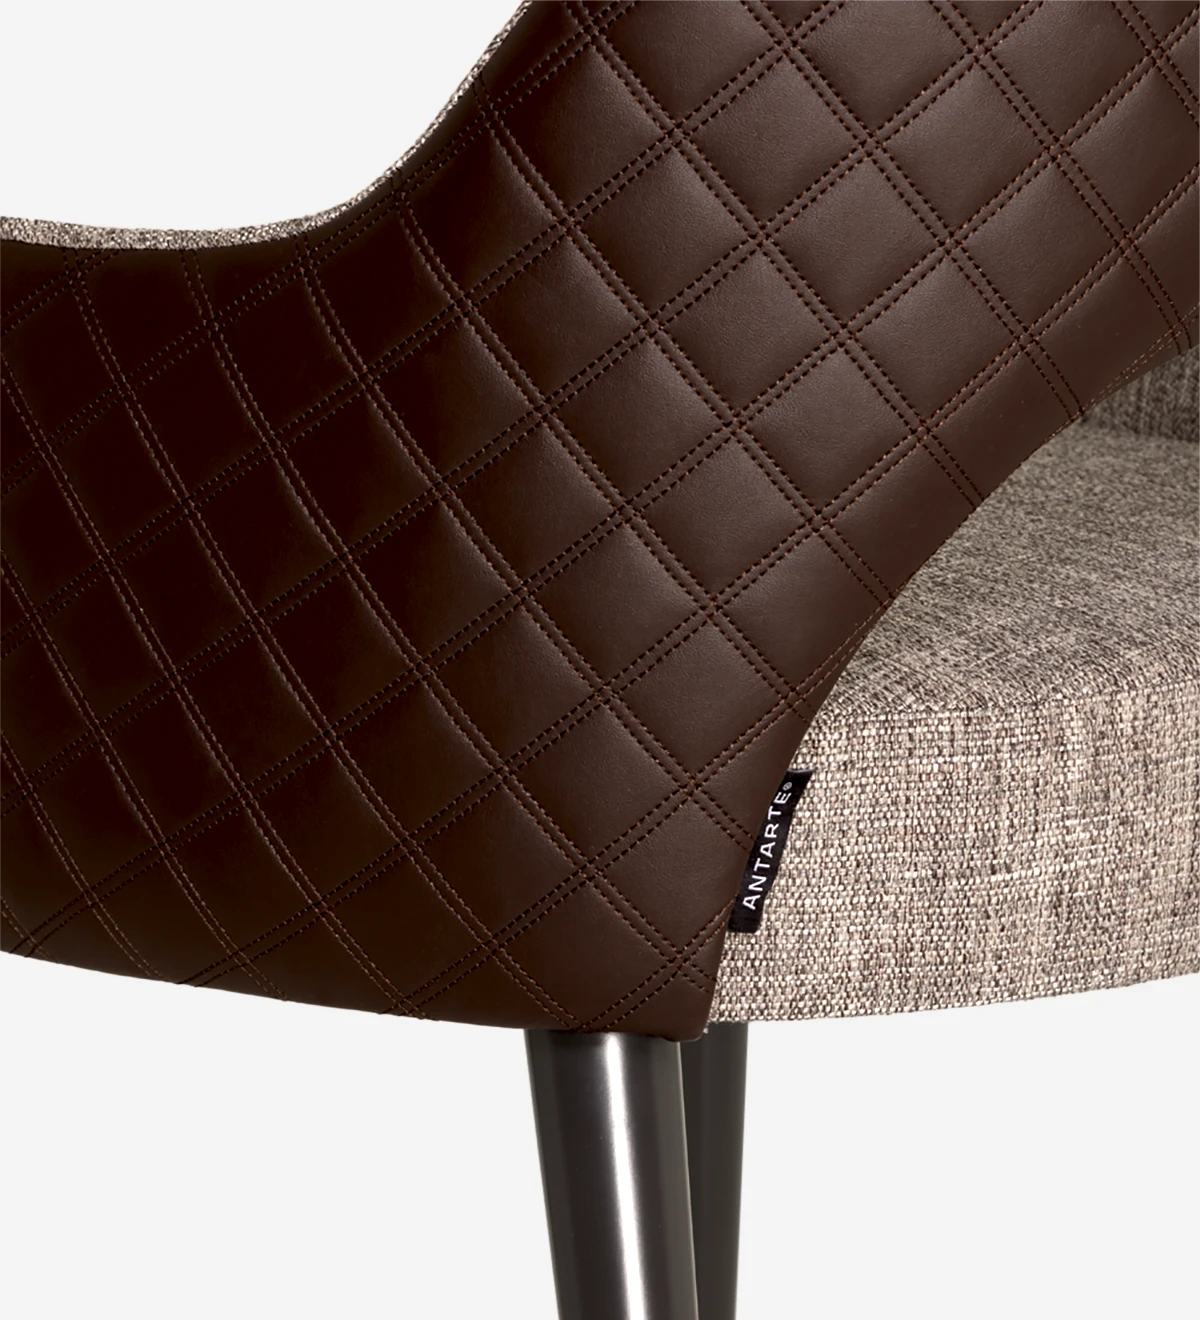 Chaise with armrests, upholstered in fabric, black lacquered feet.